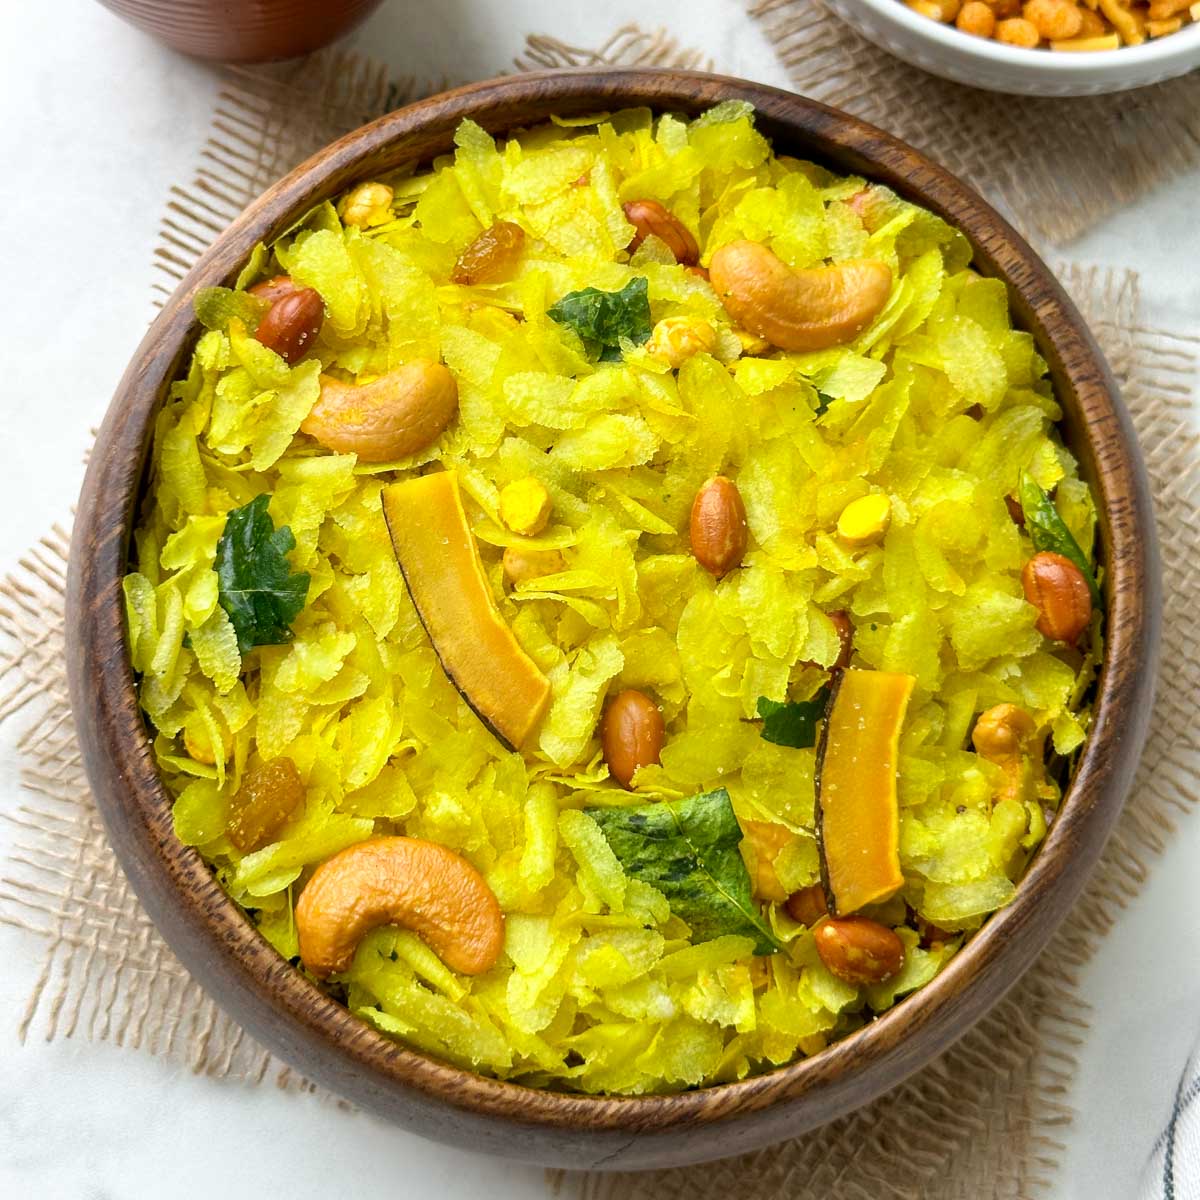 roasted poha chivda (indian namkeen) served in a wooden bowl with sev on the side